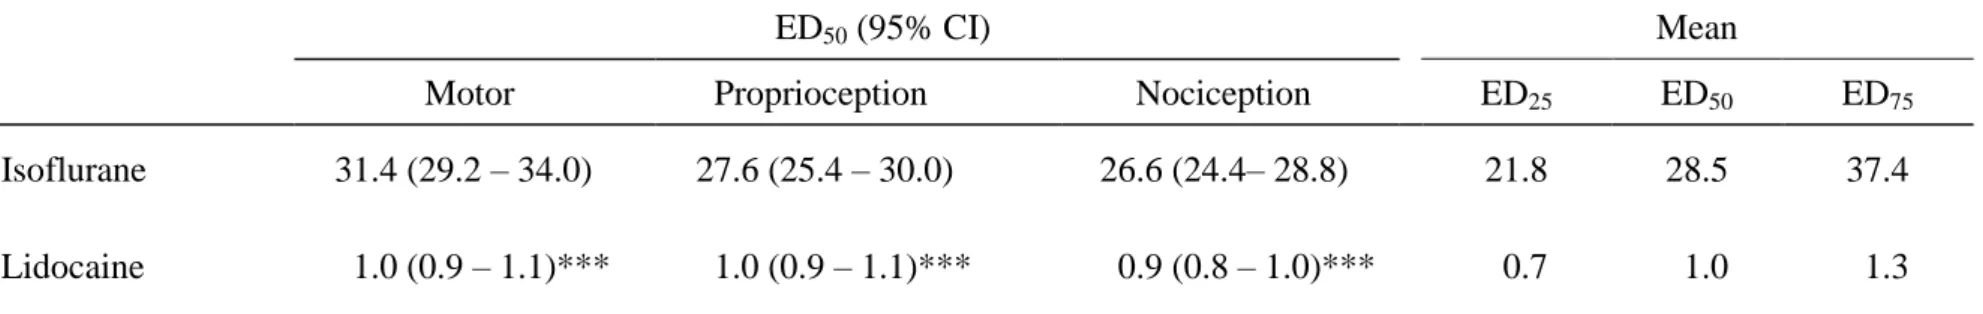 Table  2.  The  50%  effective  dose  (ED 50 )  values  of  isoflurane  and  lidocaine  with  95%  confidence  interval  (95%  CI)  on  spinal  blockades of motor, proprioception, and nociception in rats